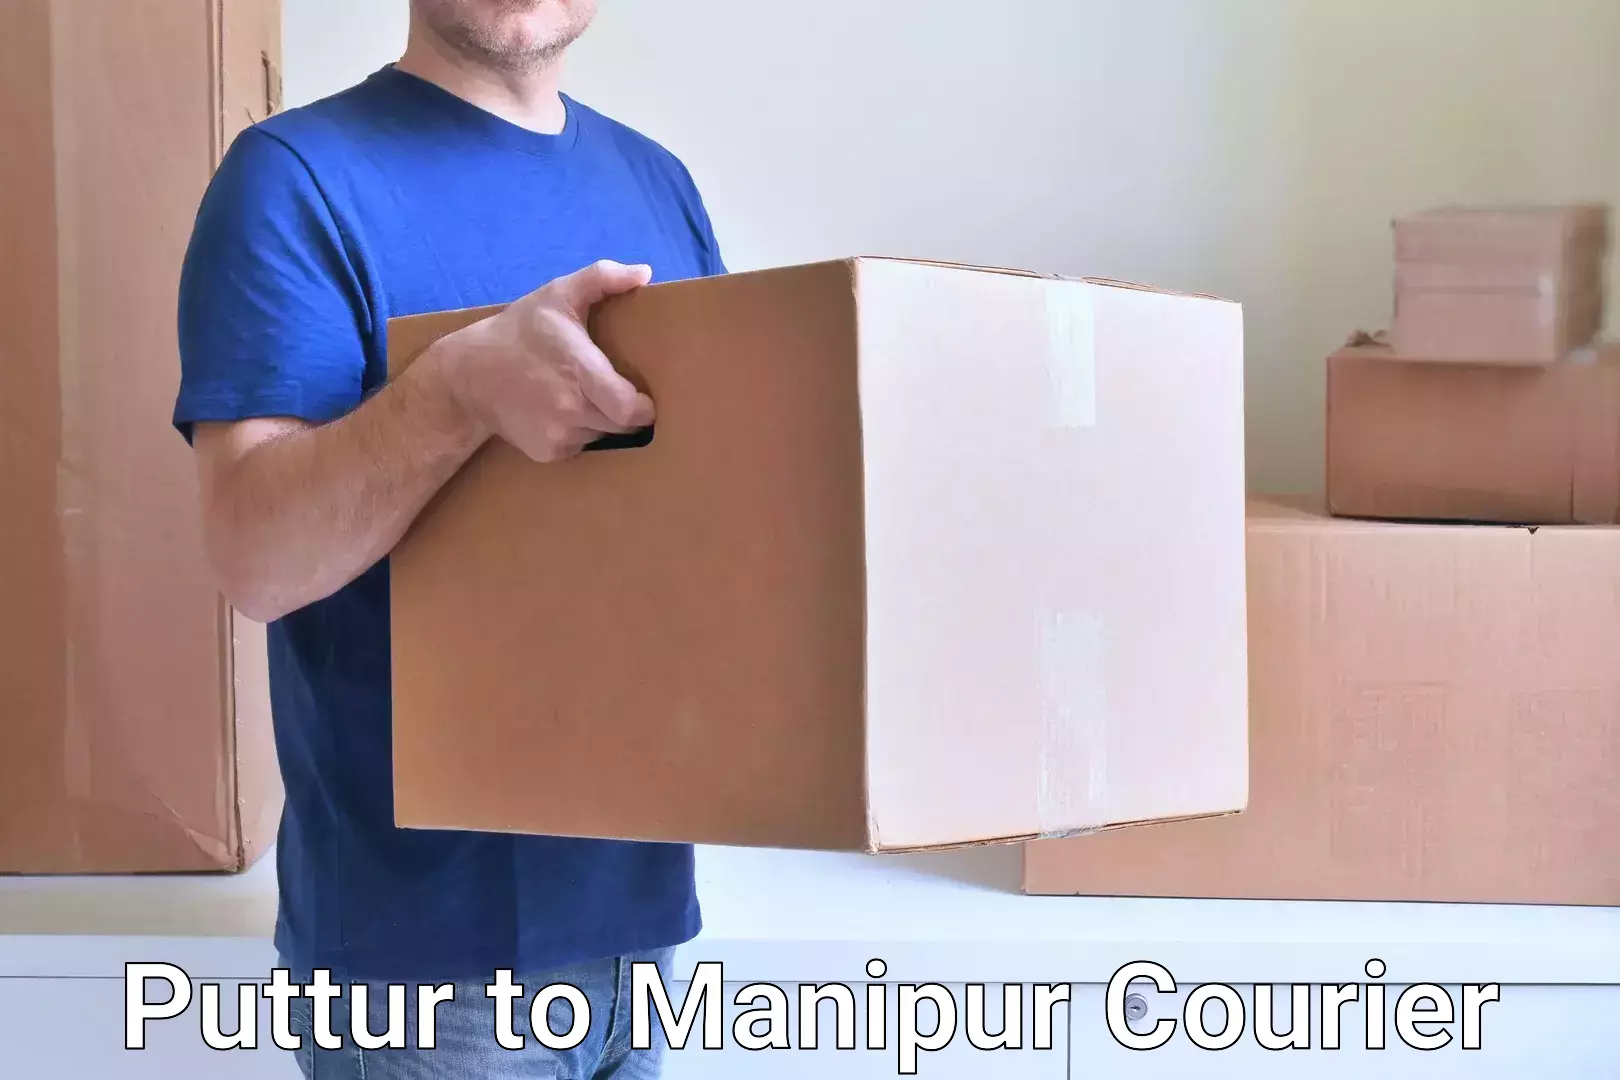 Next-day delivery options Puttur to Manipur